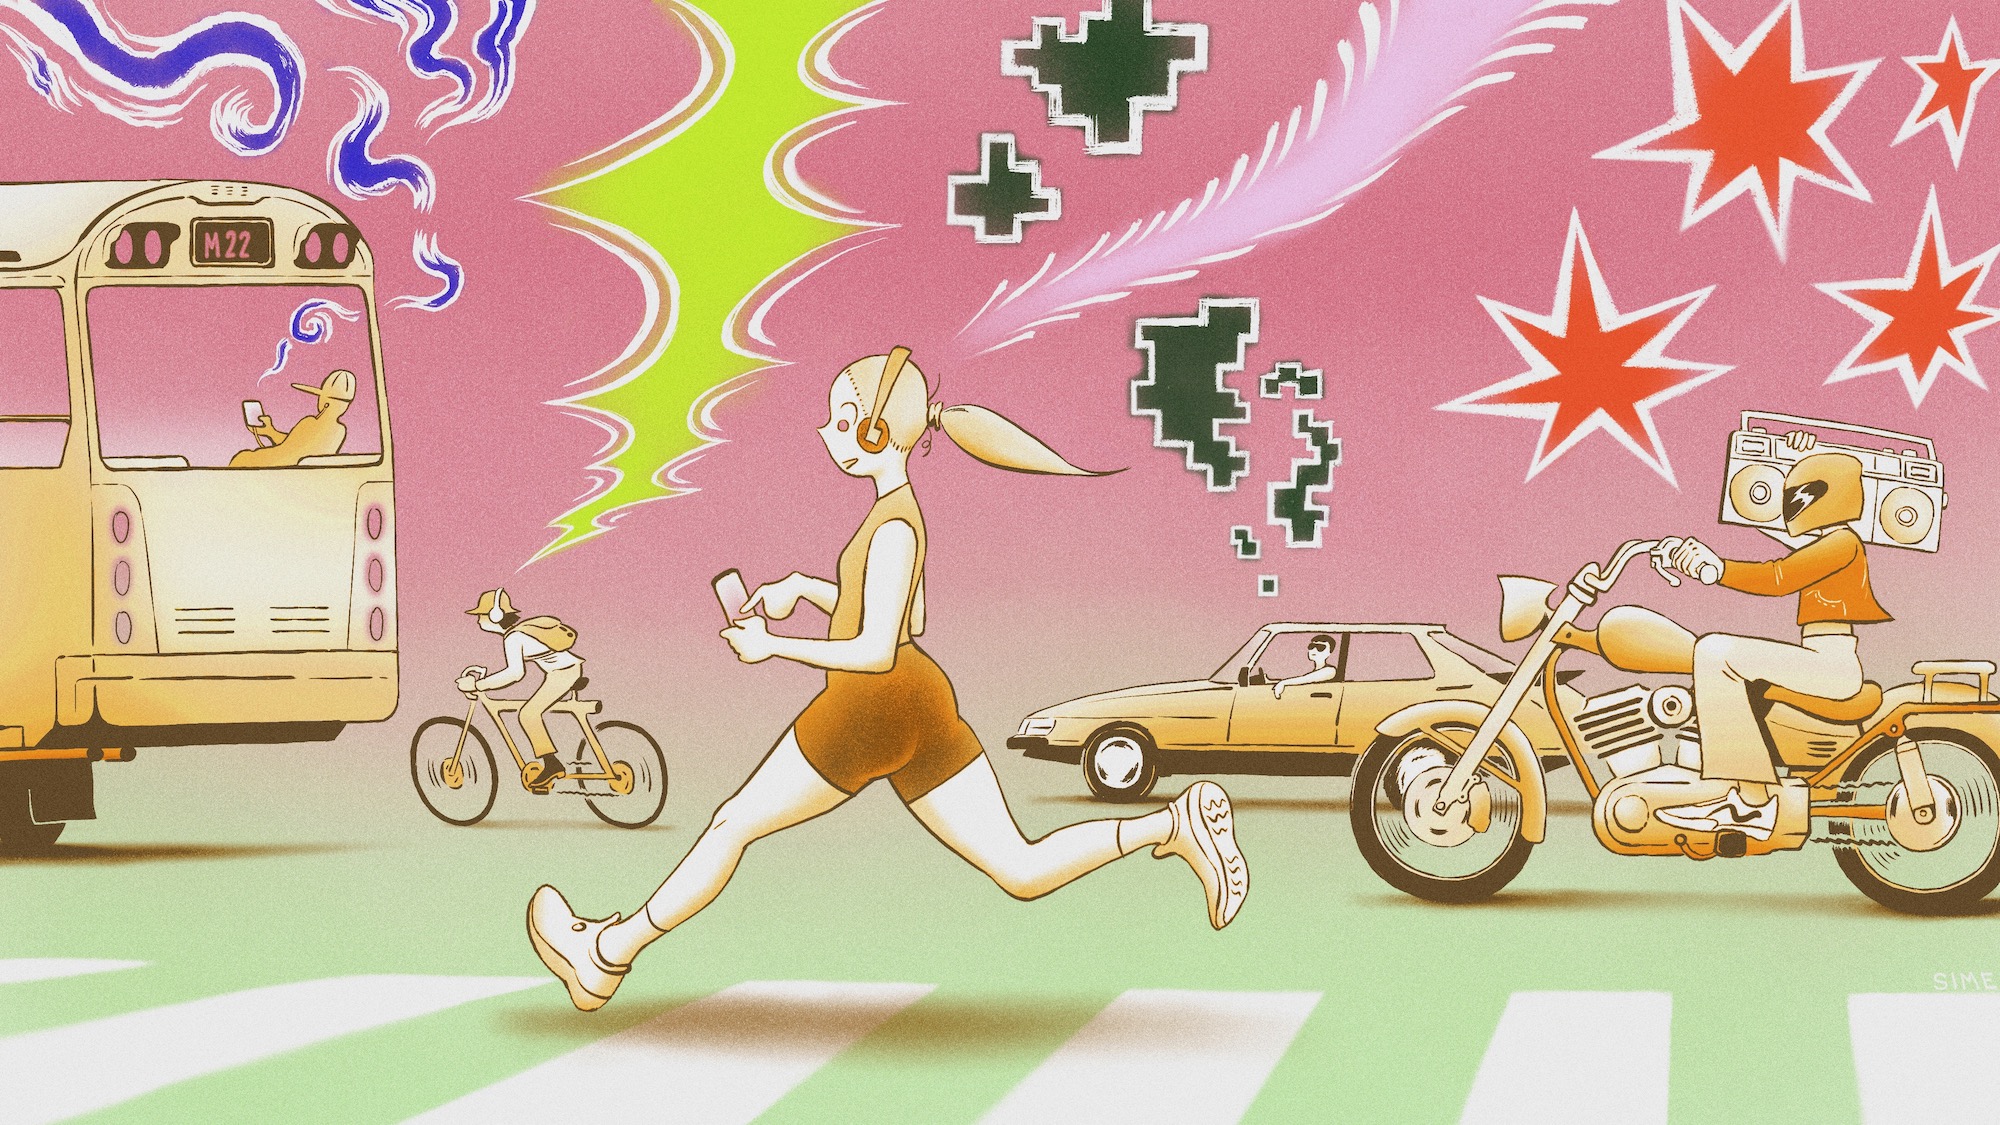 Colorful illustration of woman running with headphones on. In background, people on a bus, on a motorcycle, on a bike and in a car all listen to music as well.